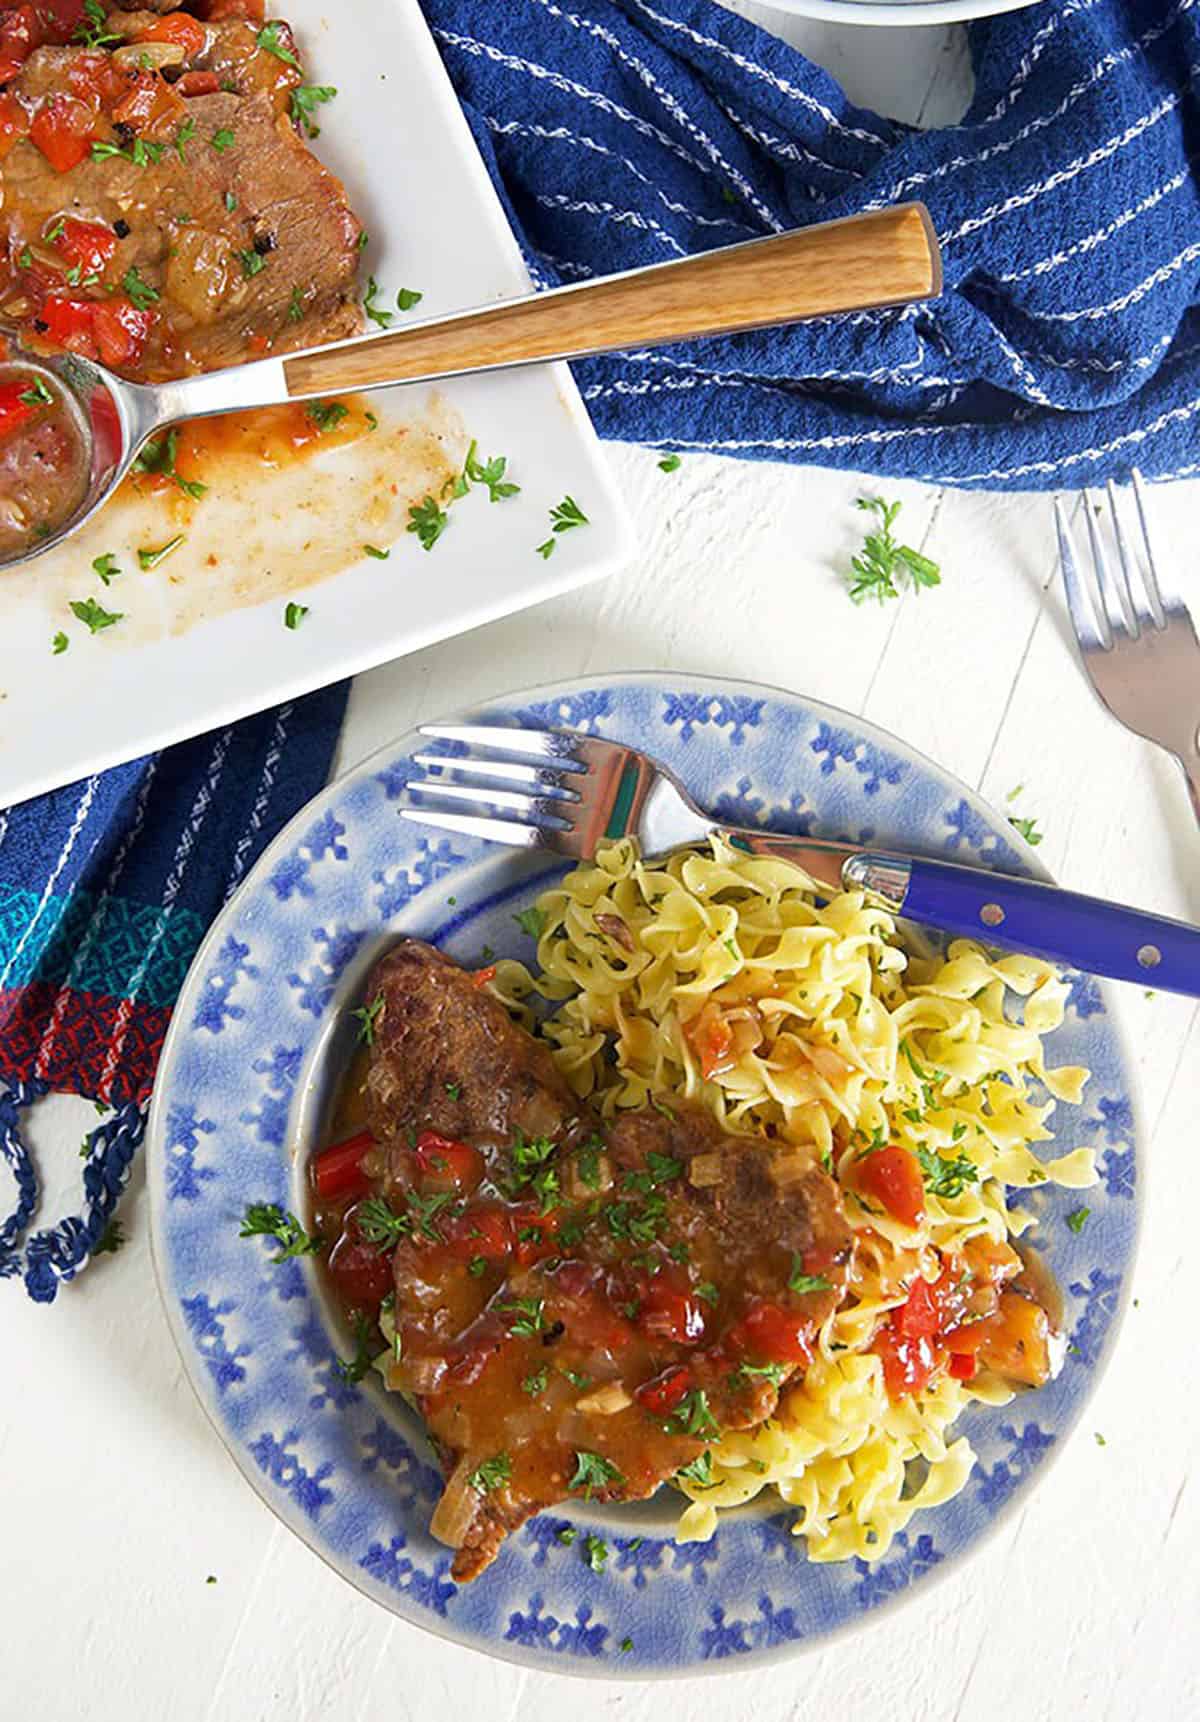 Swiss steak shown on a blue plate with egg noodles and a fork.